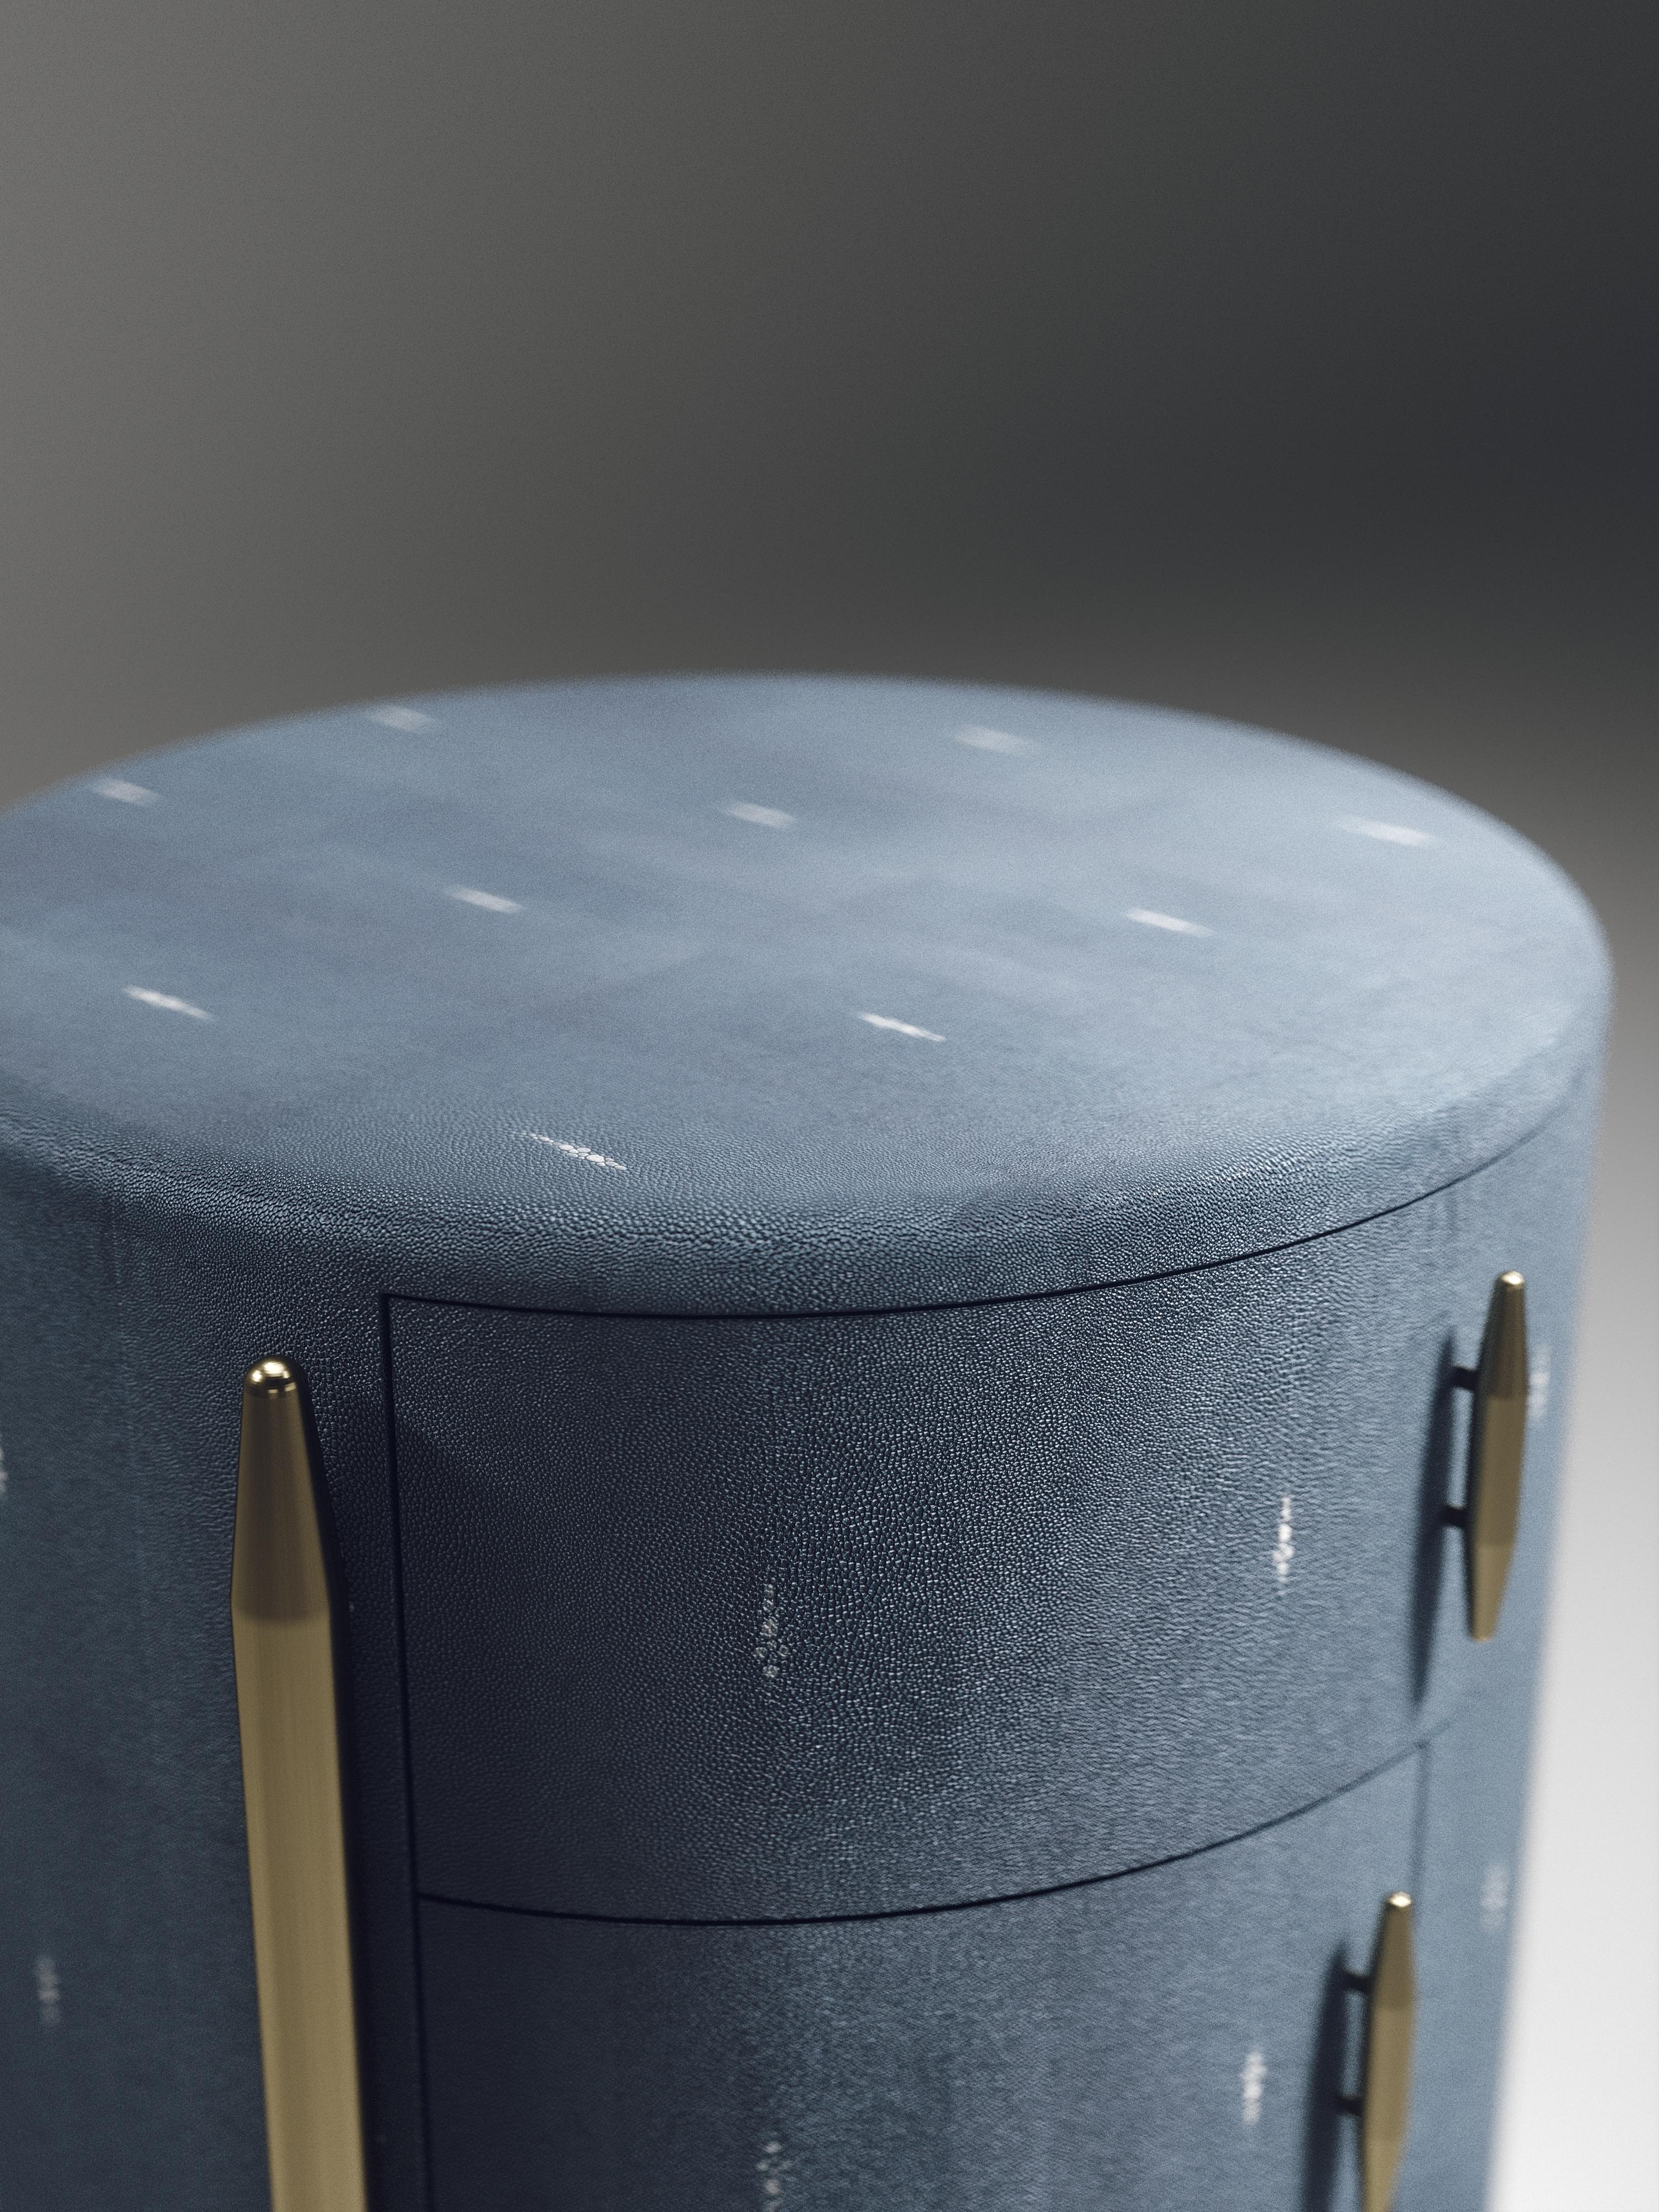 The Dandy round bedside table by Kifu Paris is an elegant and a luxurious home accent, inlaid in dark denim blue shagreen with bronze-patina brass details. This piece includes 1 drawer total and a cabinet below; the interiors are inlaid in gemelina